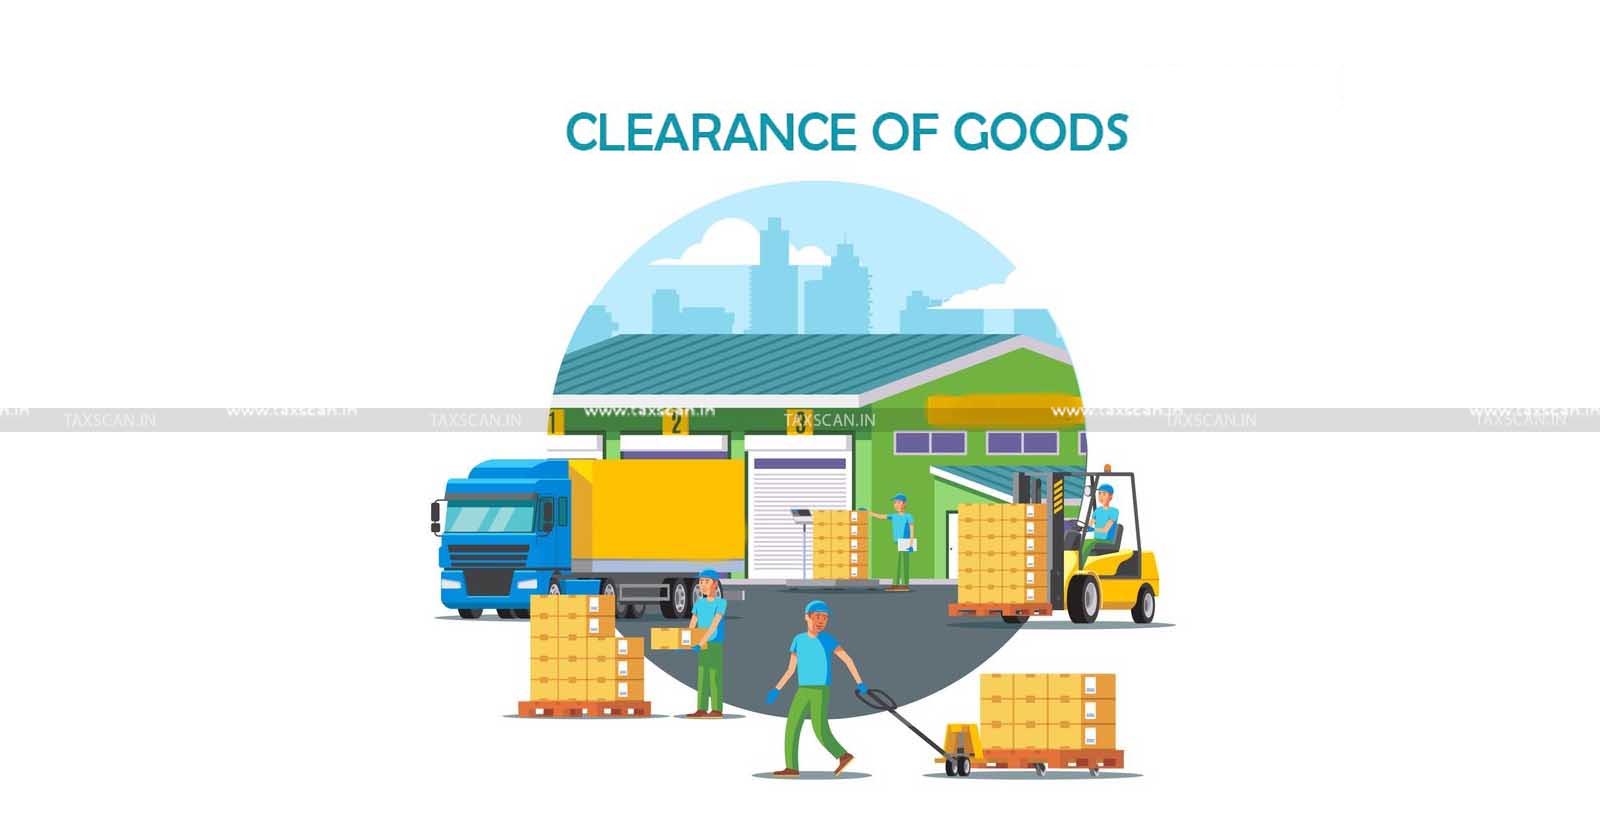 No Excise Duty Demand - Payment of differential duty along - Interest on Finalisation of value subsequent to Clearance of goods - CESTAT - TAXSCAN